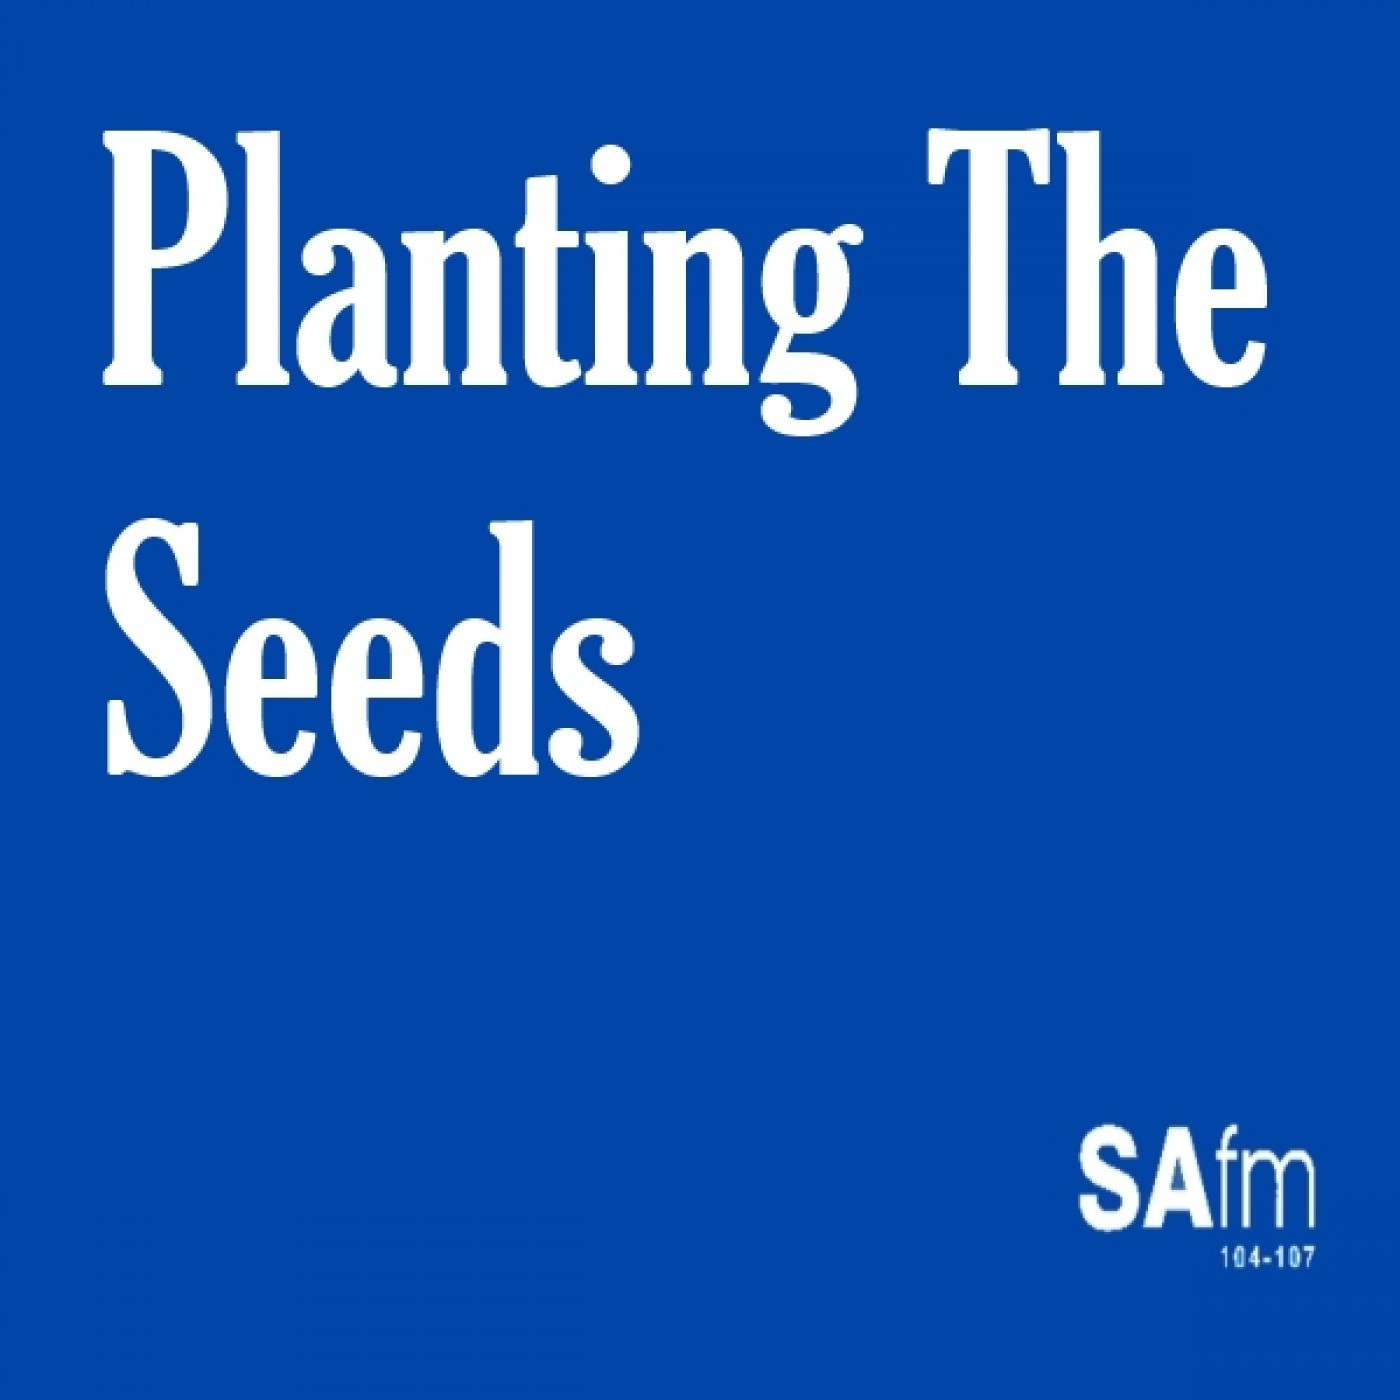 18-03-2019 PLANTING THE SEEDS